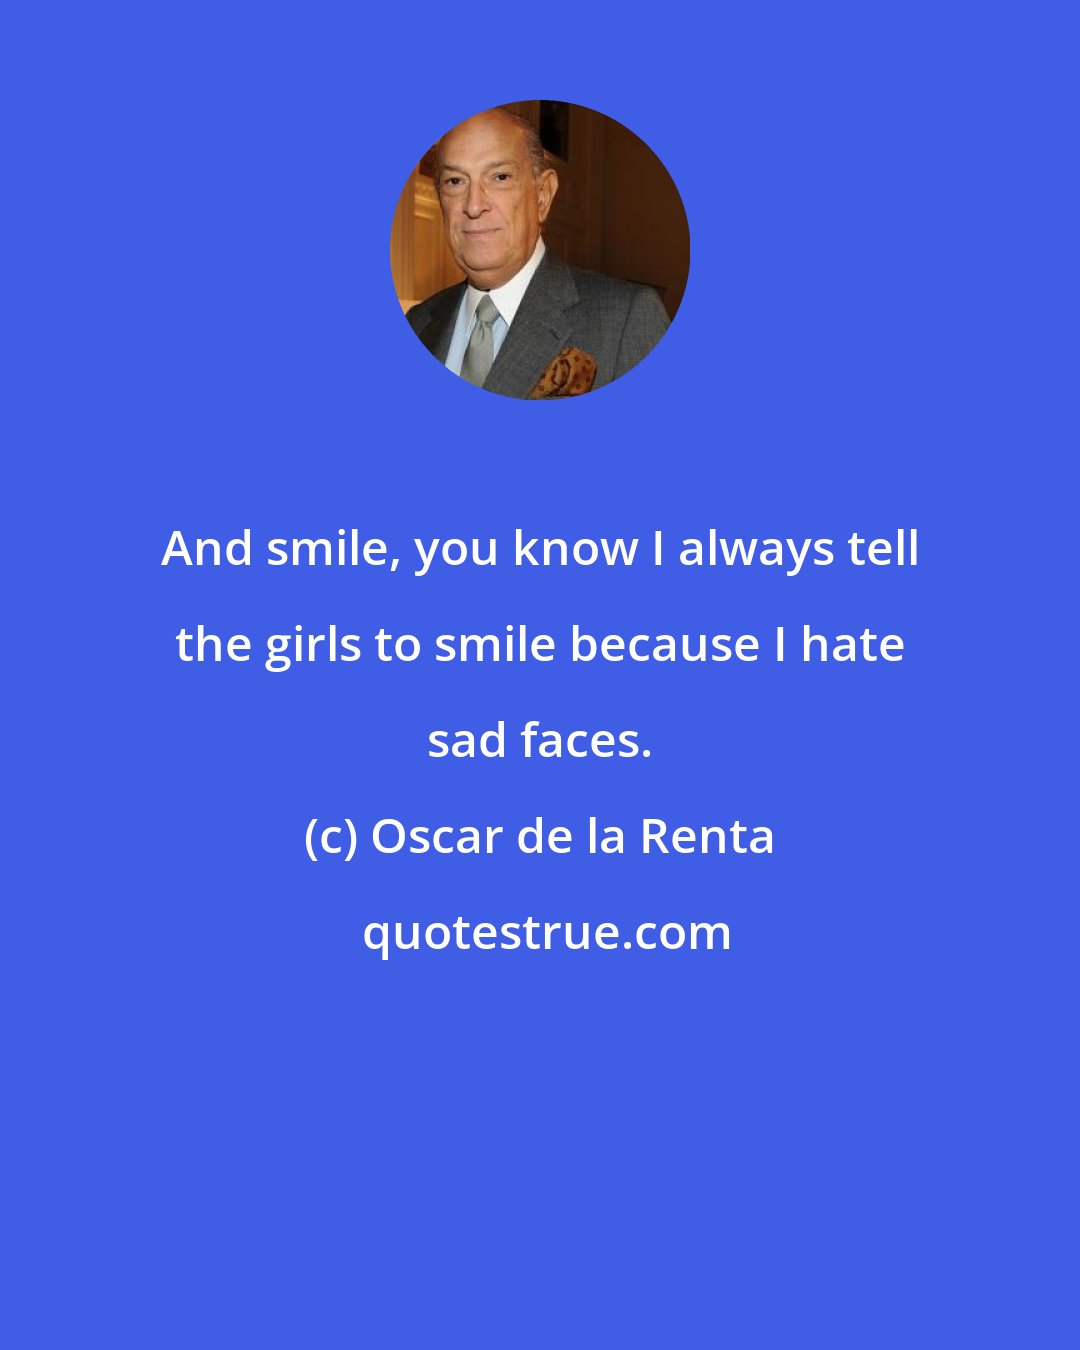 Oscar de la Renta: And smile, you know I always tell the girls to smile because I hate sad faces.